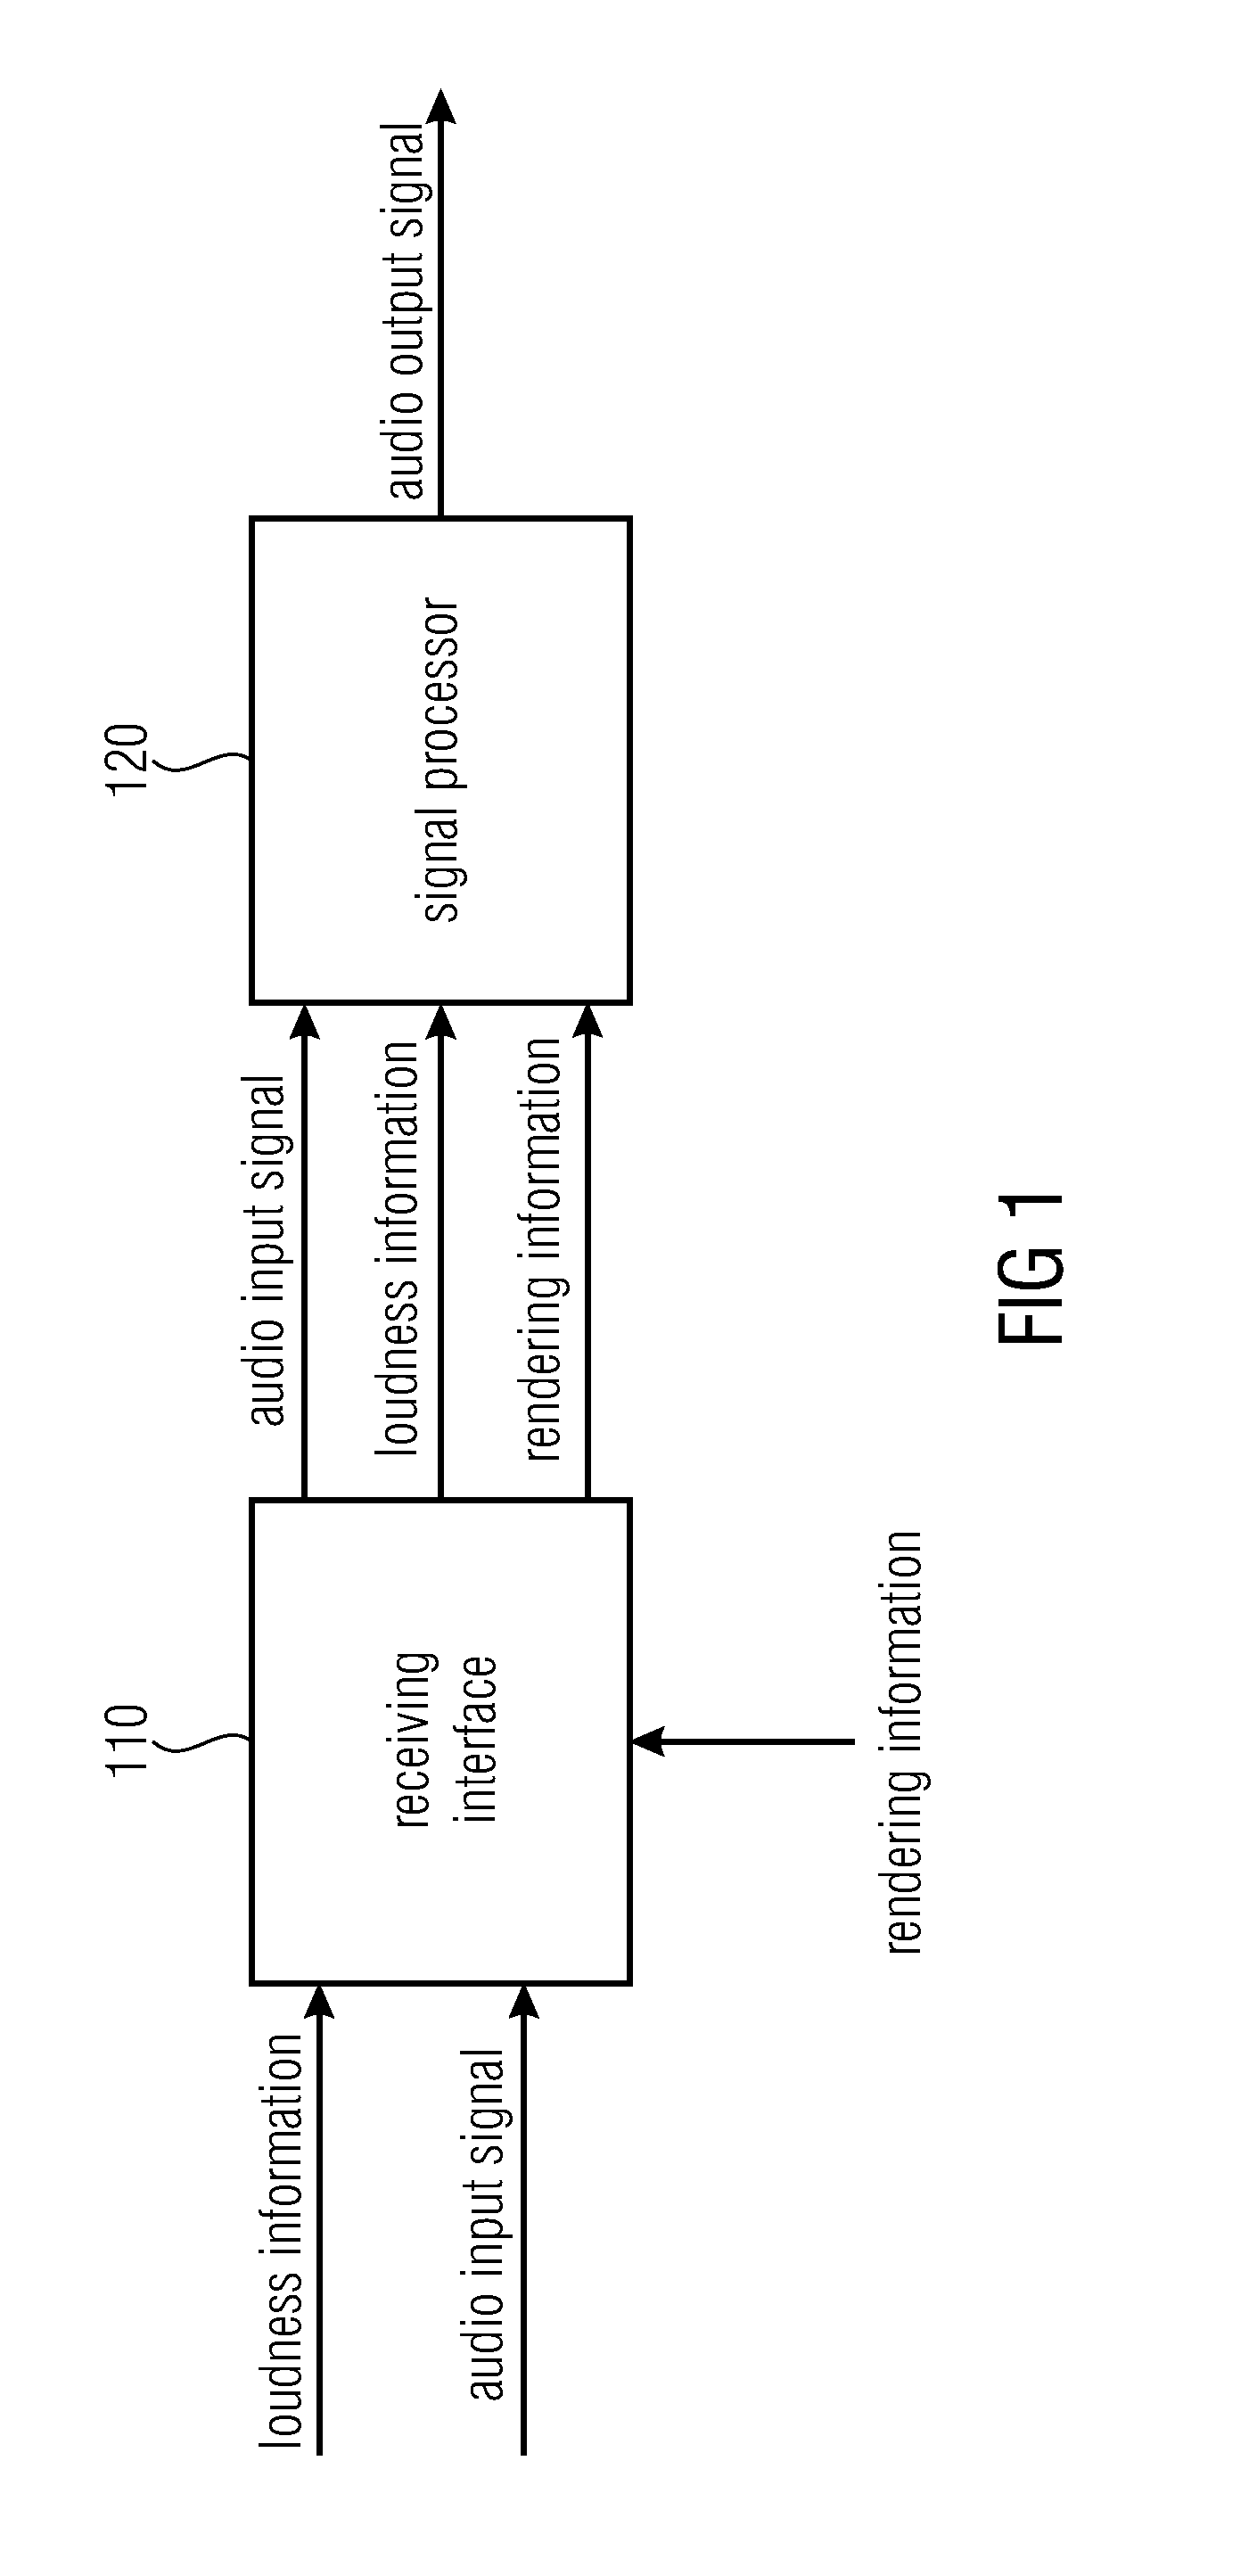 Decoder, encoder and method for informed loudness estimation employing by-pass audio object signals in object-based audio coding systems